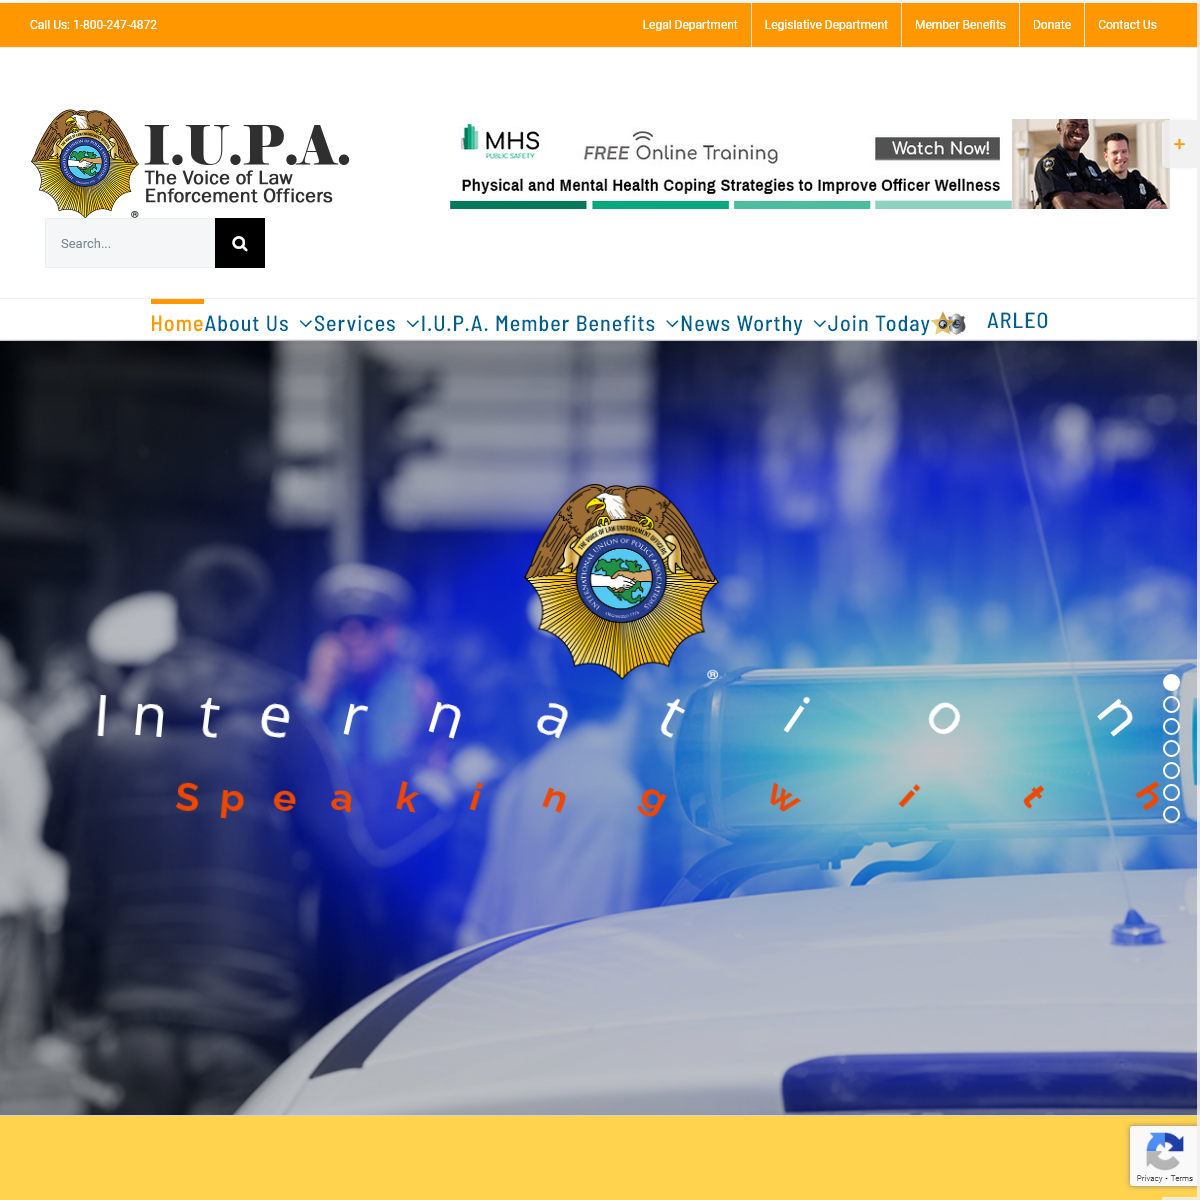 A complete backup of iupa.org